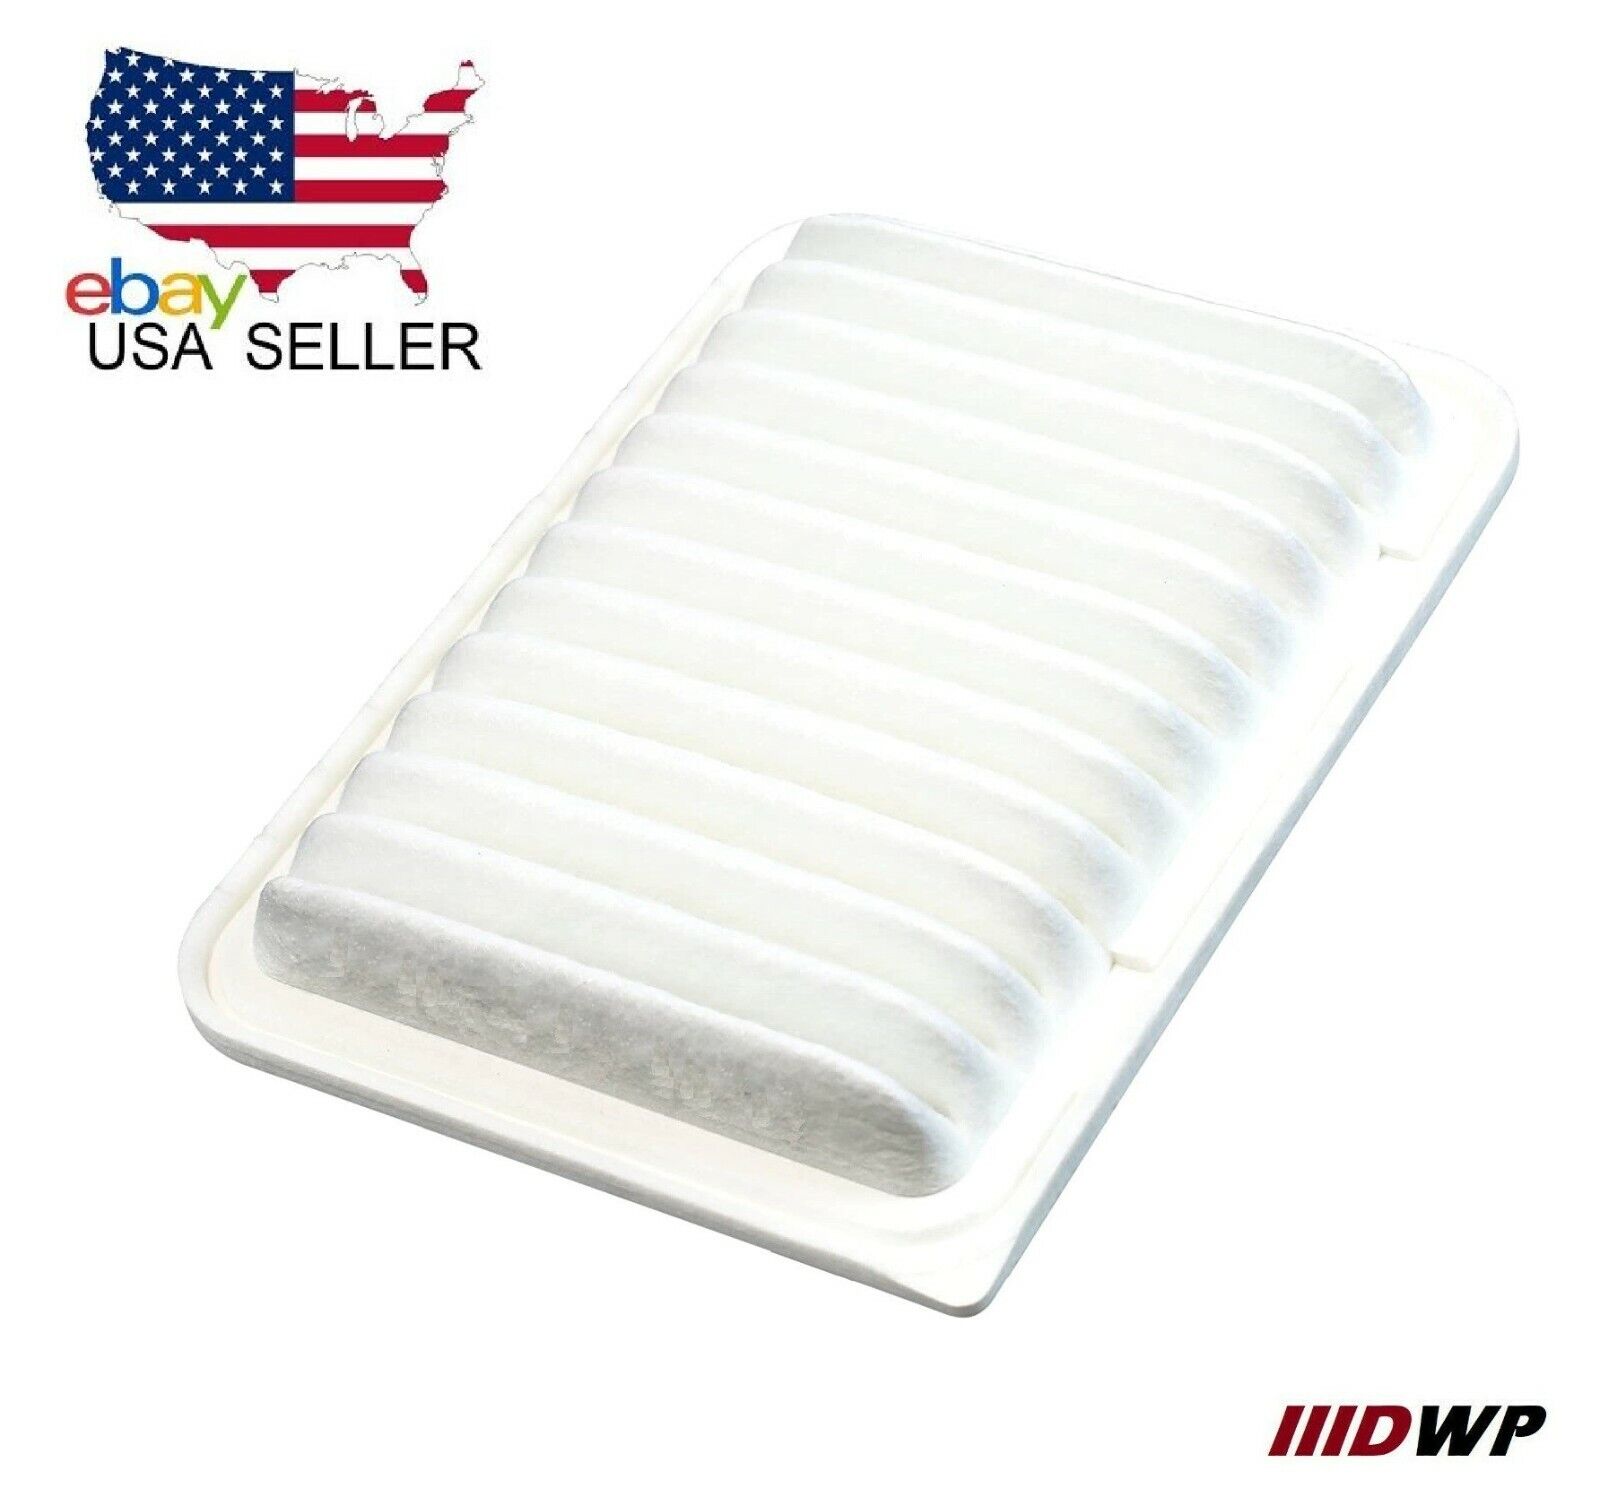 A25655 ENGINE AIR FILTER FOR 2009-2019 TOYOTA COROLLA 1.8L 2007-2018 YARIS iM xD